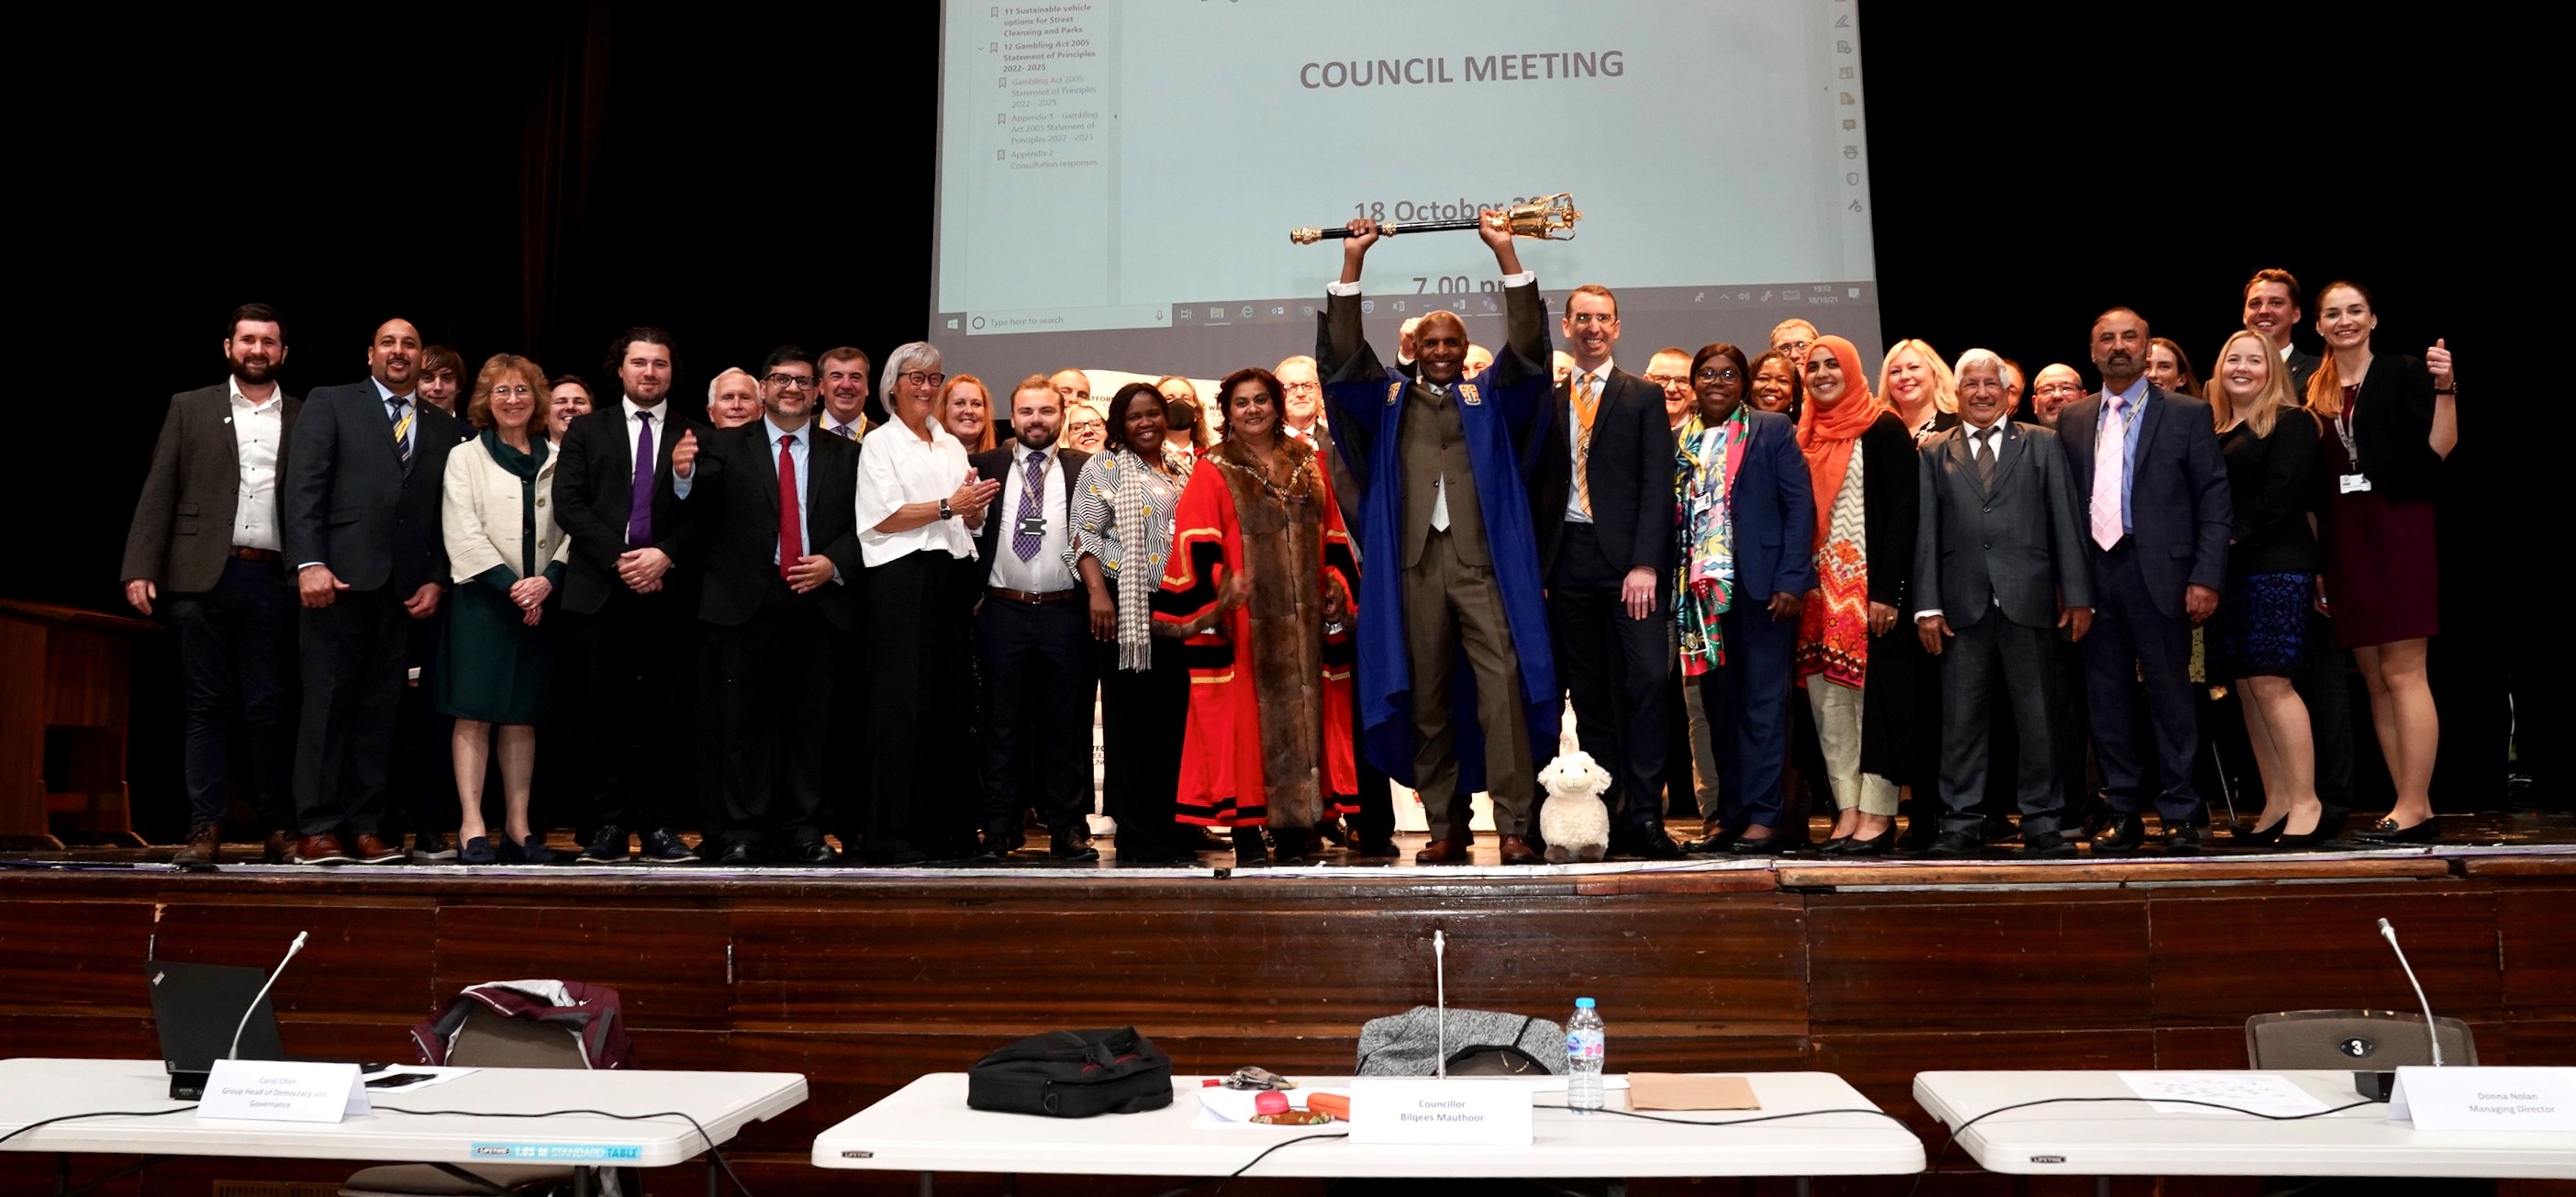 Luther Blissett at Freeman Ceremony with Councillors